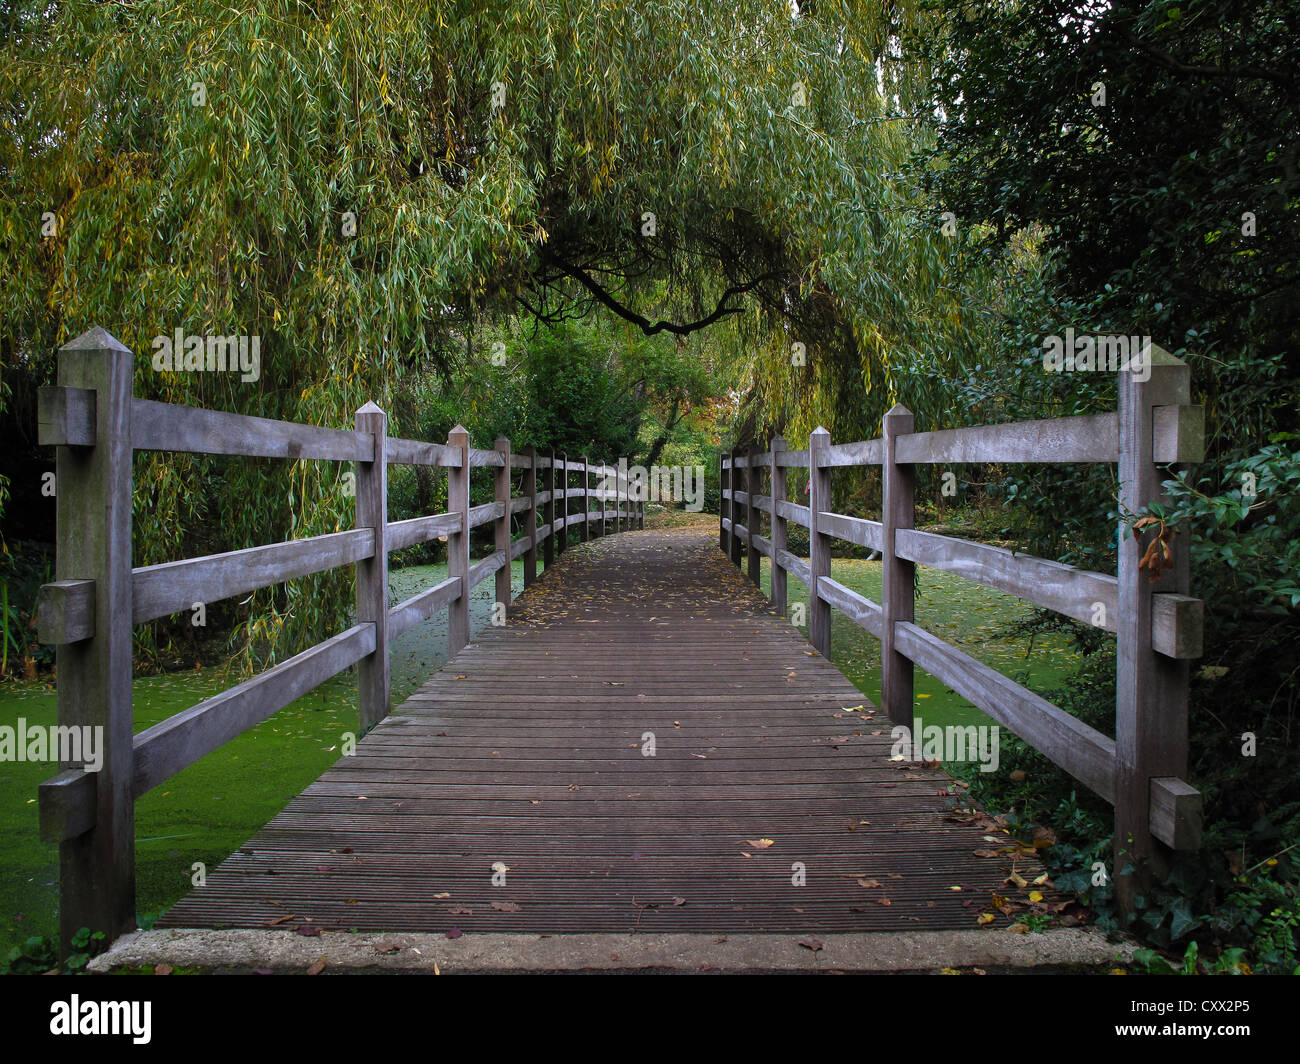 Wooden bridge over a algae covered pond in central London Stock Photo